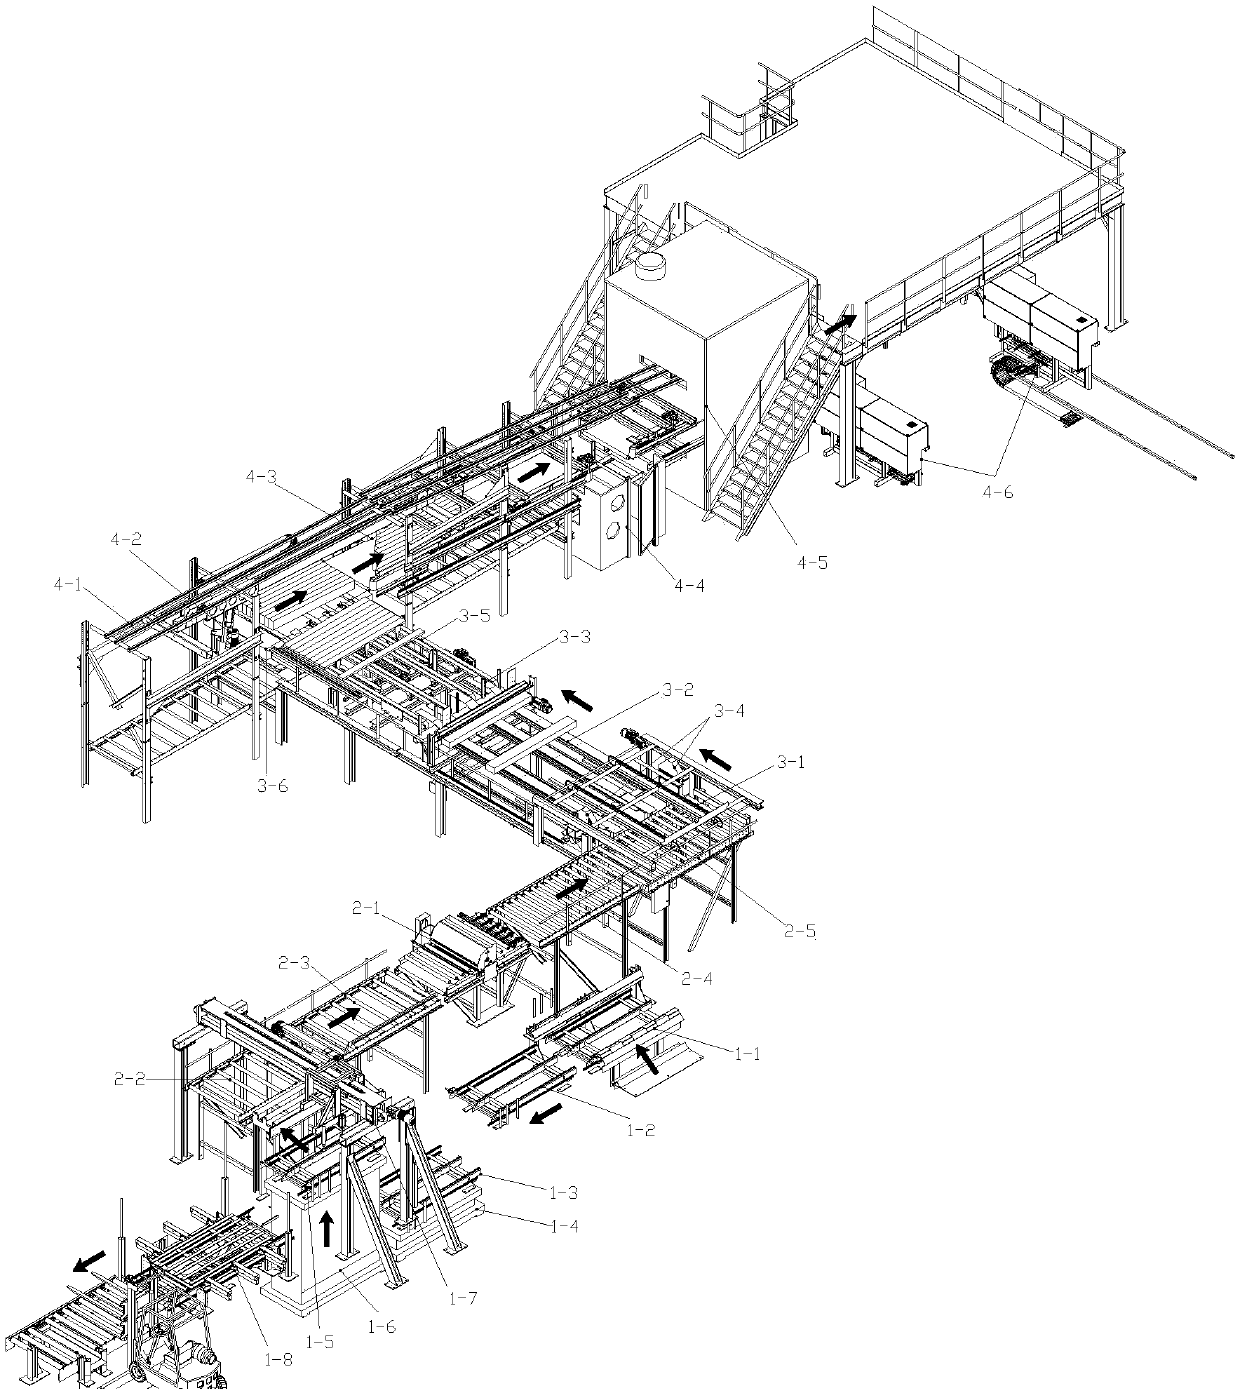 A feeding system for a composite sandwich panel production line